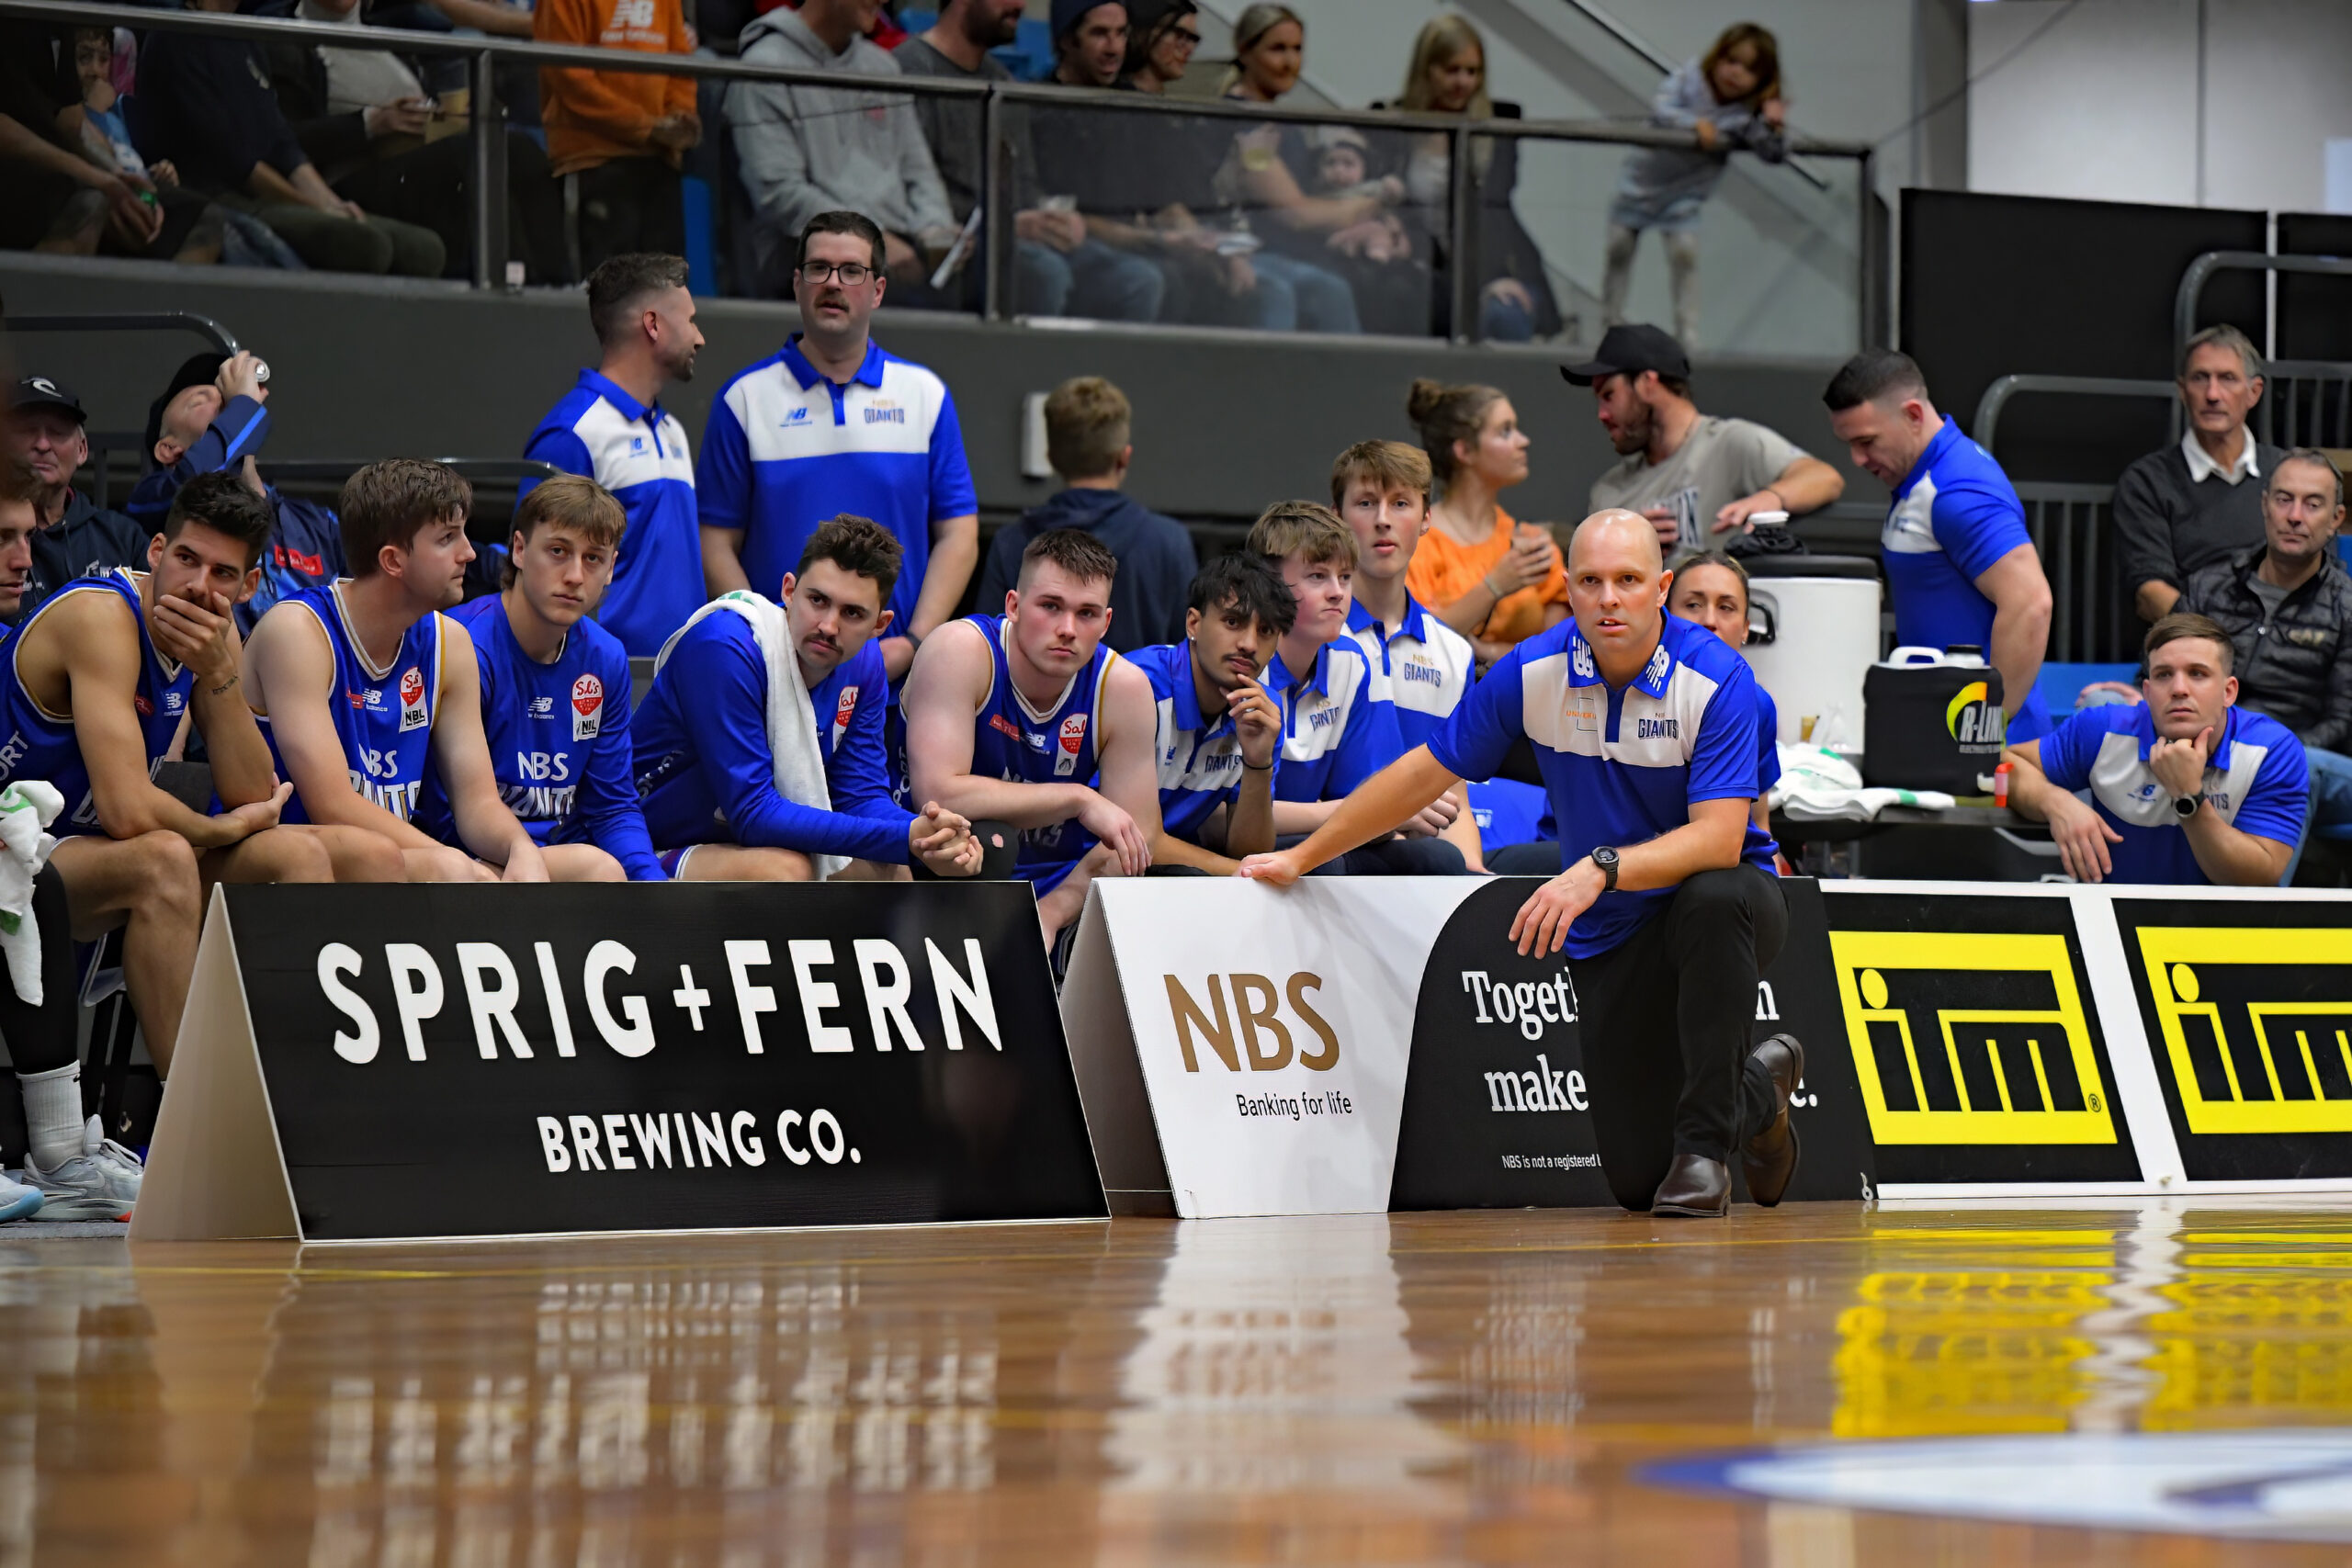 Mike Fitchett and the Nelson Giants basketball team behind a Sprig and Fern Brewing Co sign